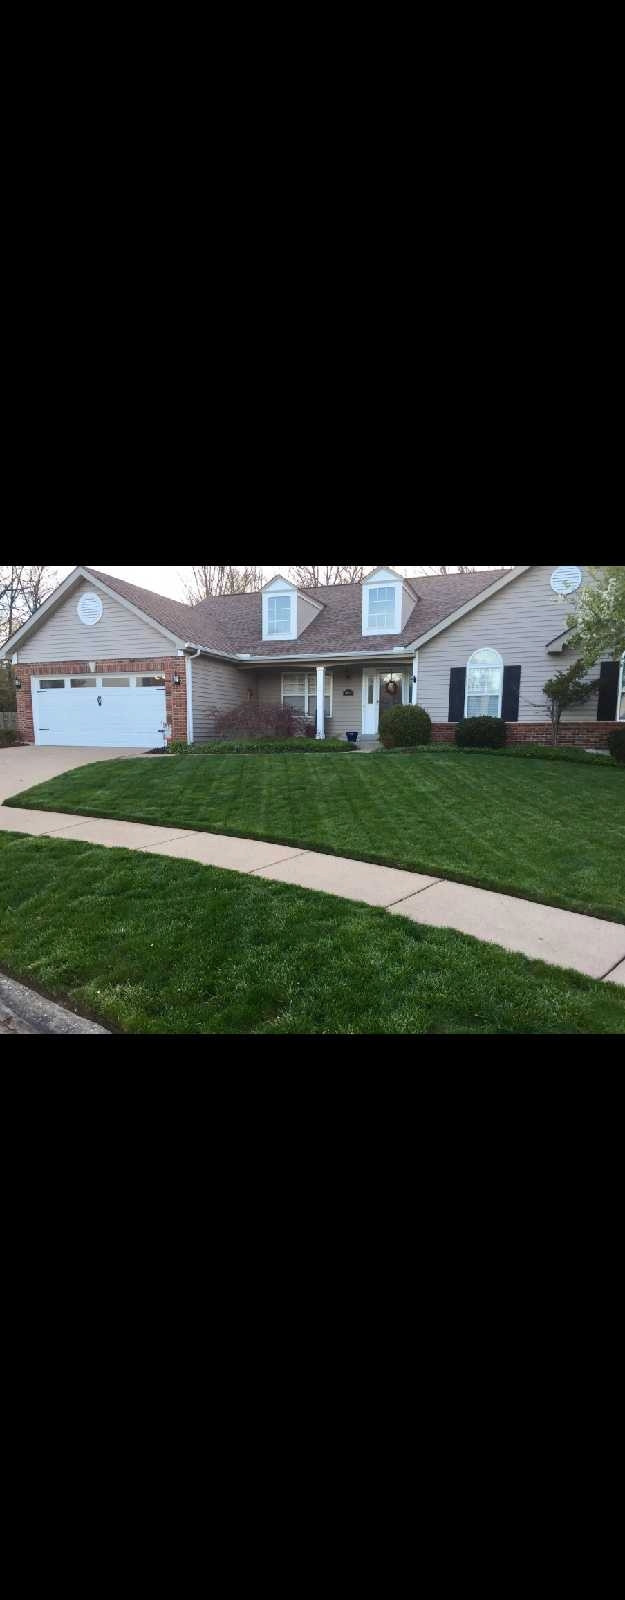 Lawn Maintenance Grass Cutting in Lawn, Tree Maintenance & Eavestrough in North Bay